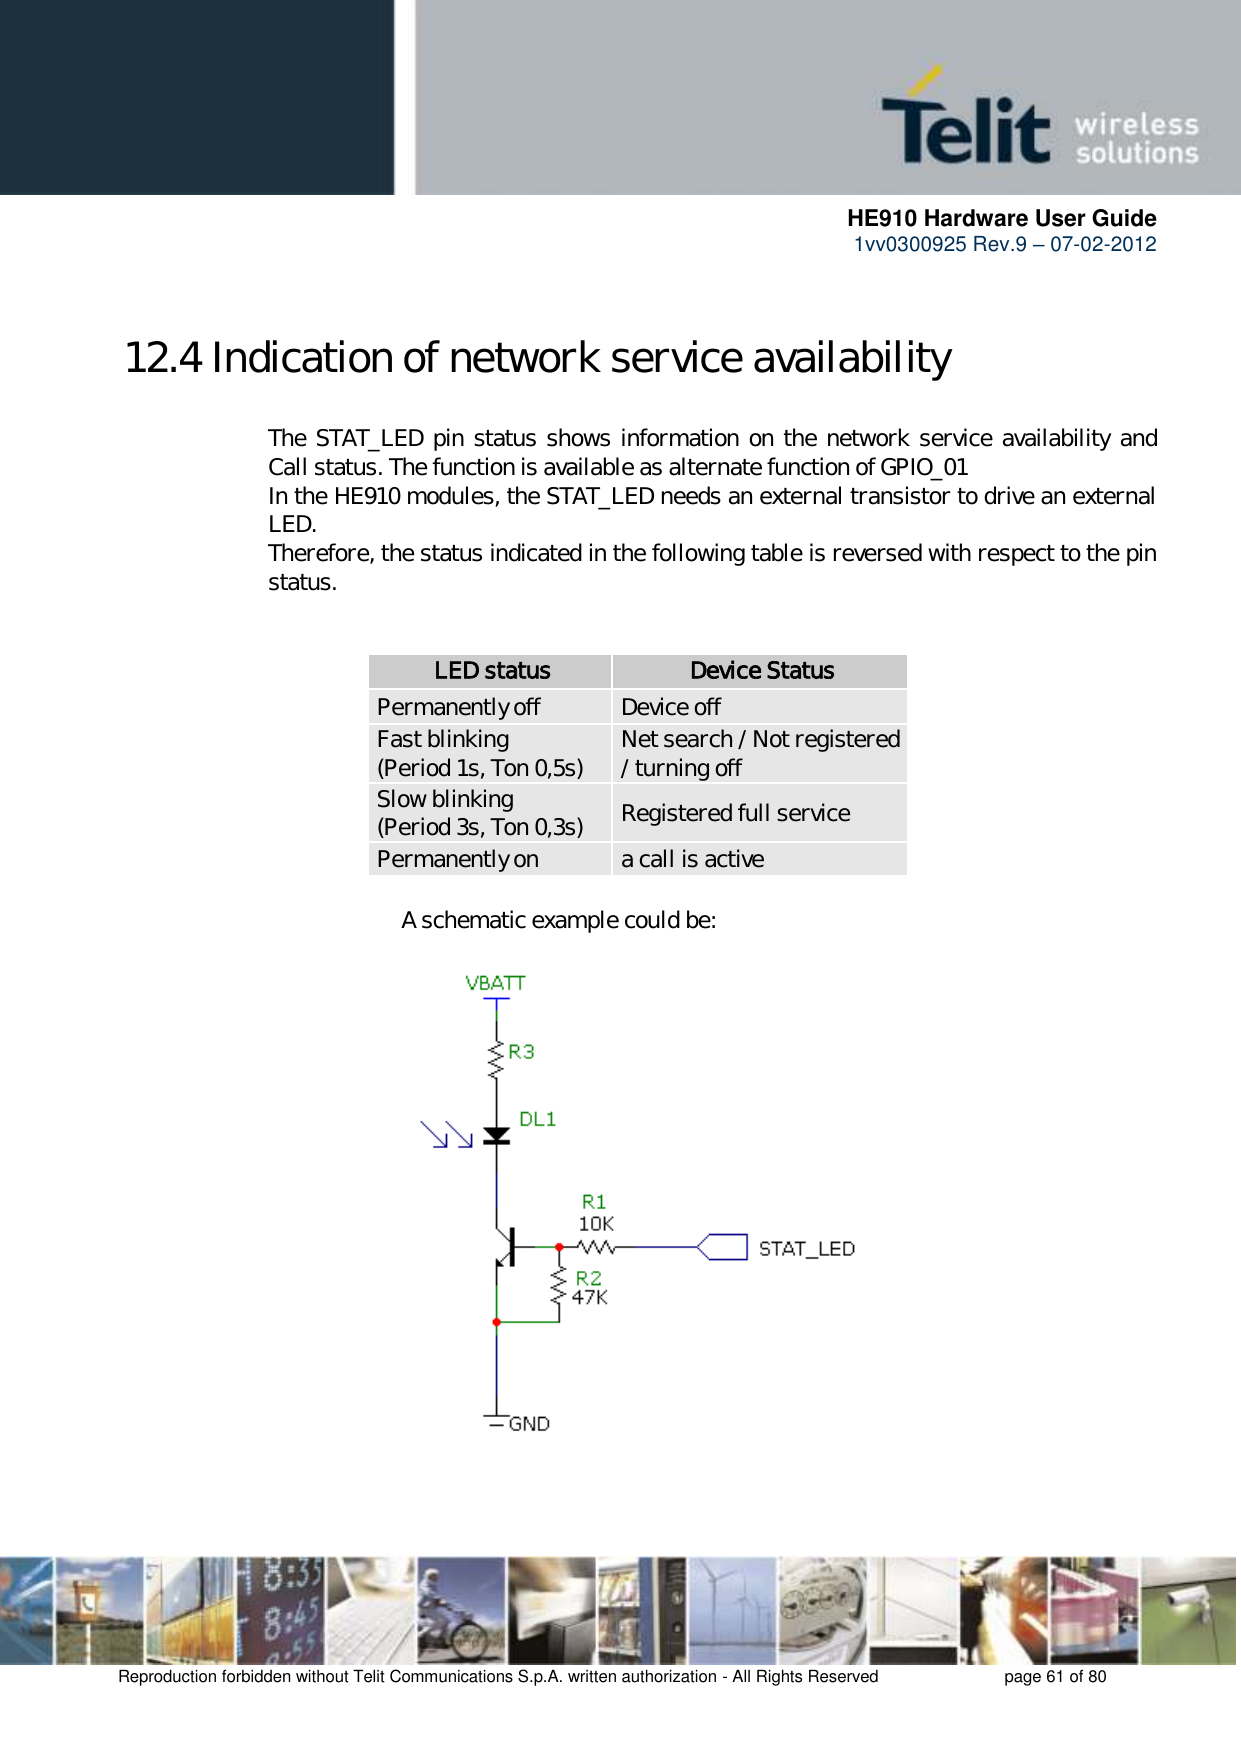      HE910 Hardware User Guide 1vv0300925 Rev.9 – 07-02-2012    Reproduction forbidden without Telit Communications S.p.A. written authorization - All Rights Reserved    page 61 of 80  12.4 Indication of network service availability  The STAT_LED pin status shows information on the network service availability and Call status. The function is available as alternate function of GPIO_01 In the HE910 modules, the STAT_LED needs an external transistor to drive an external LED. Therefore, the status indicated in the following table is reversed with respect to the pin status.              LED status Device Status Permanently off Device off Fast blinking (Period 1s, Ton 0,5s) Net search / Not registered / turning off Slow blinking (Period 3s, Ton 0,3s) Registered full service Permanently on a call is active           A schematic example could be:      